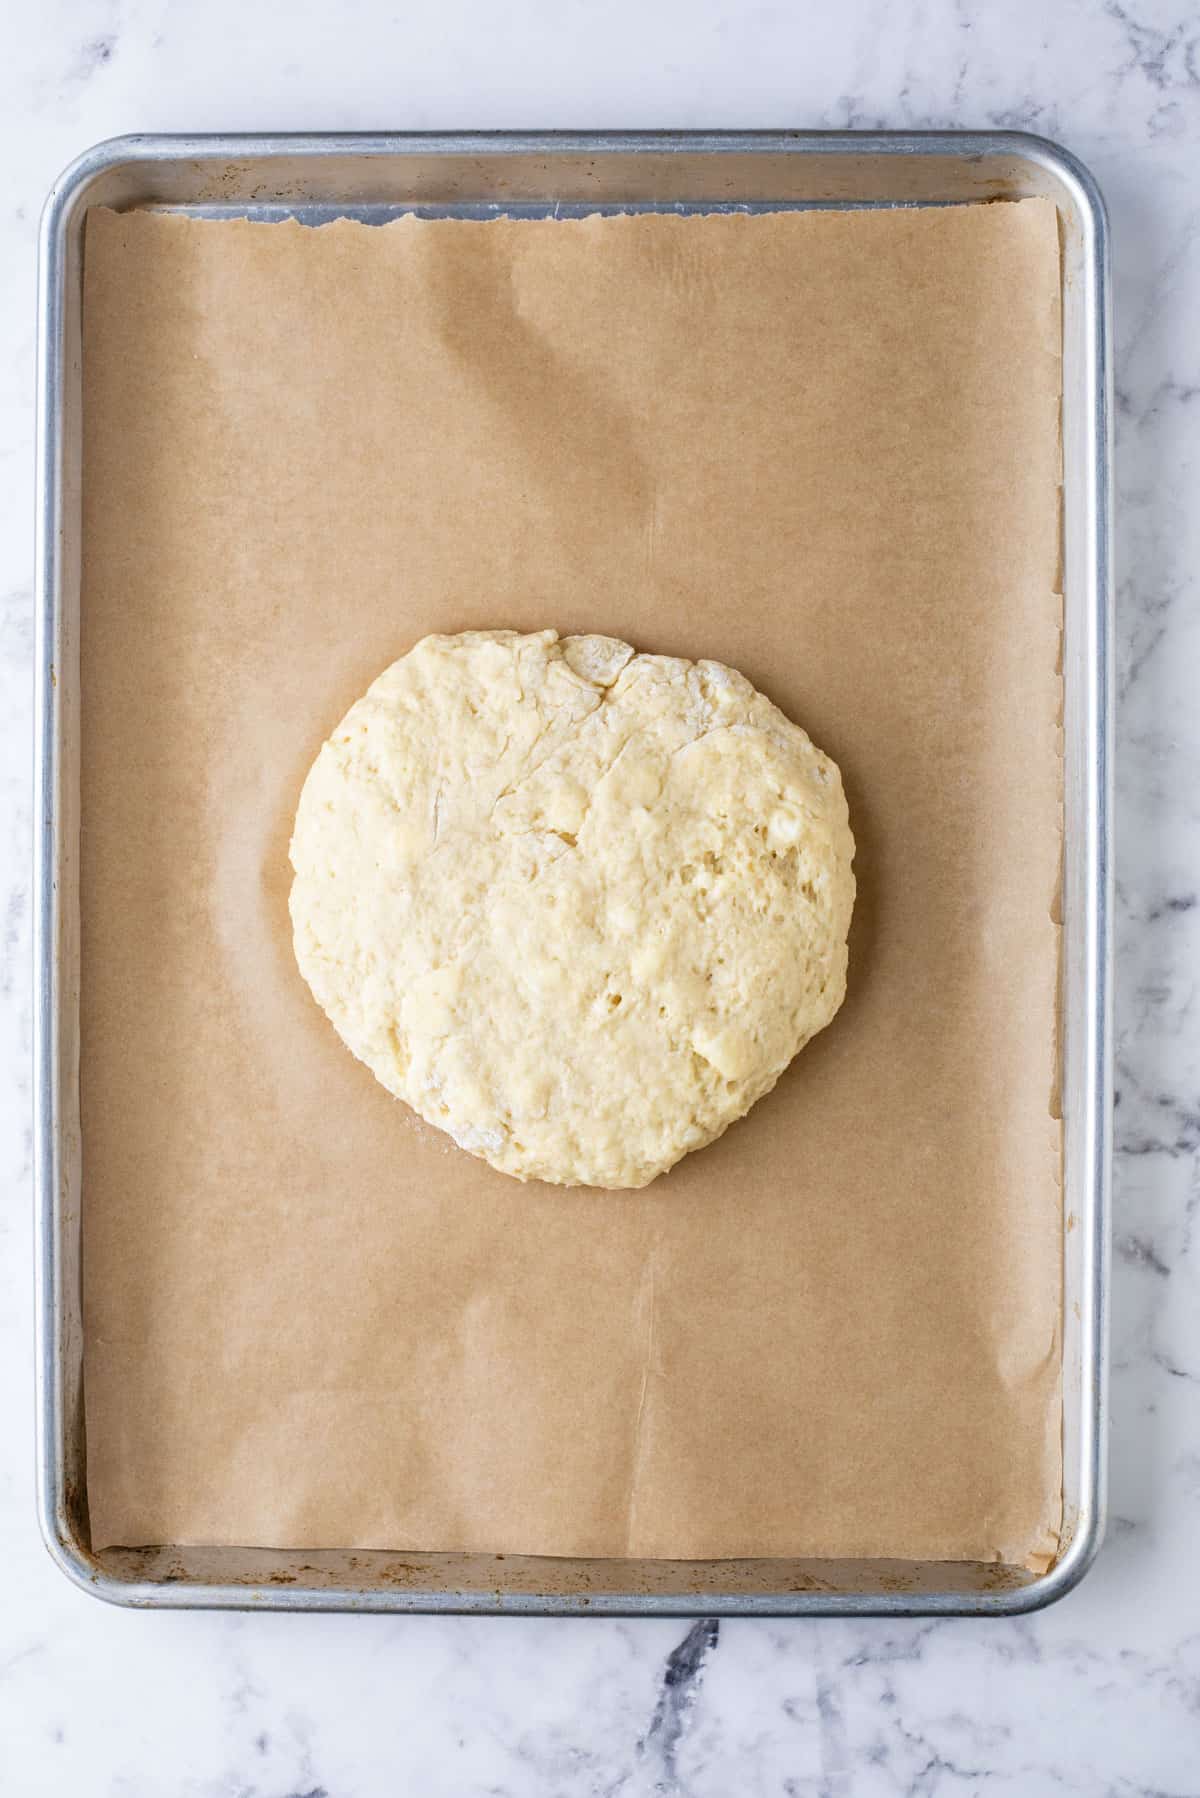 a round disc of scone dough on a baking sheet lined with parchment paper